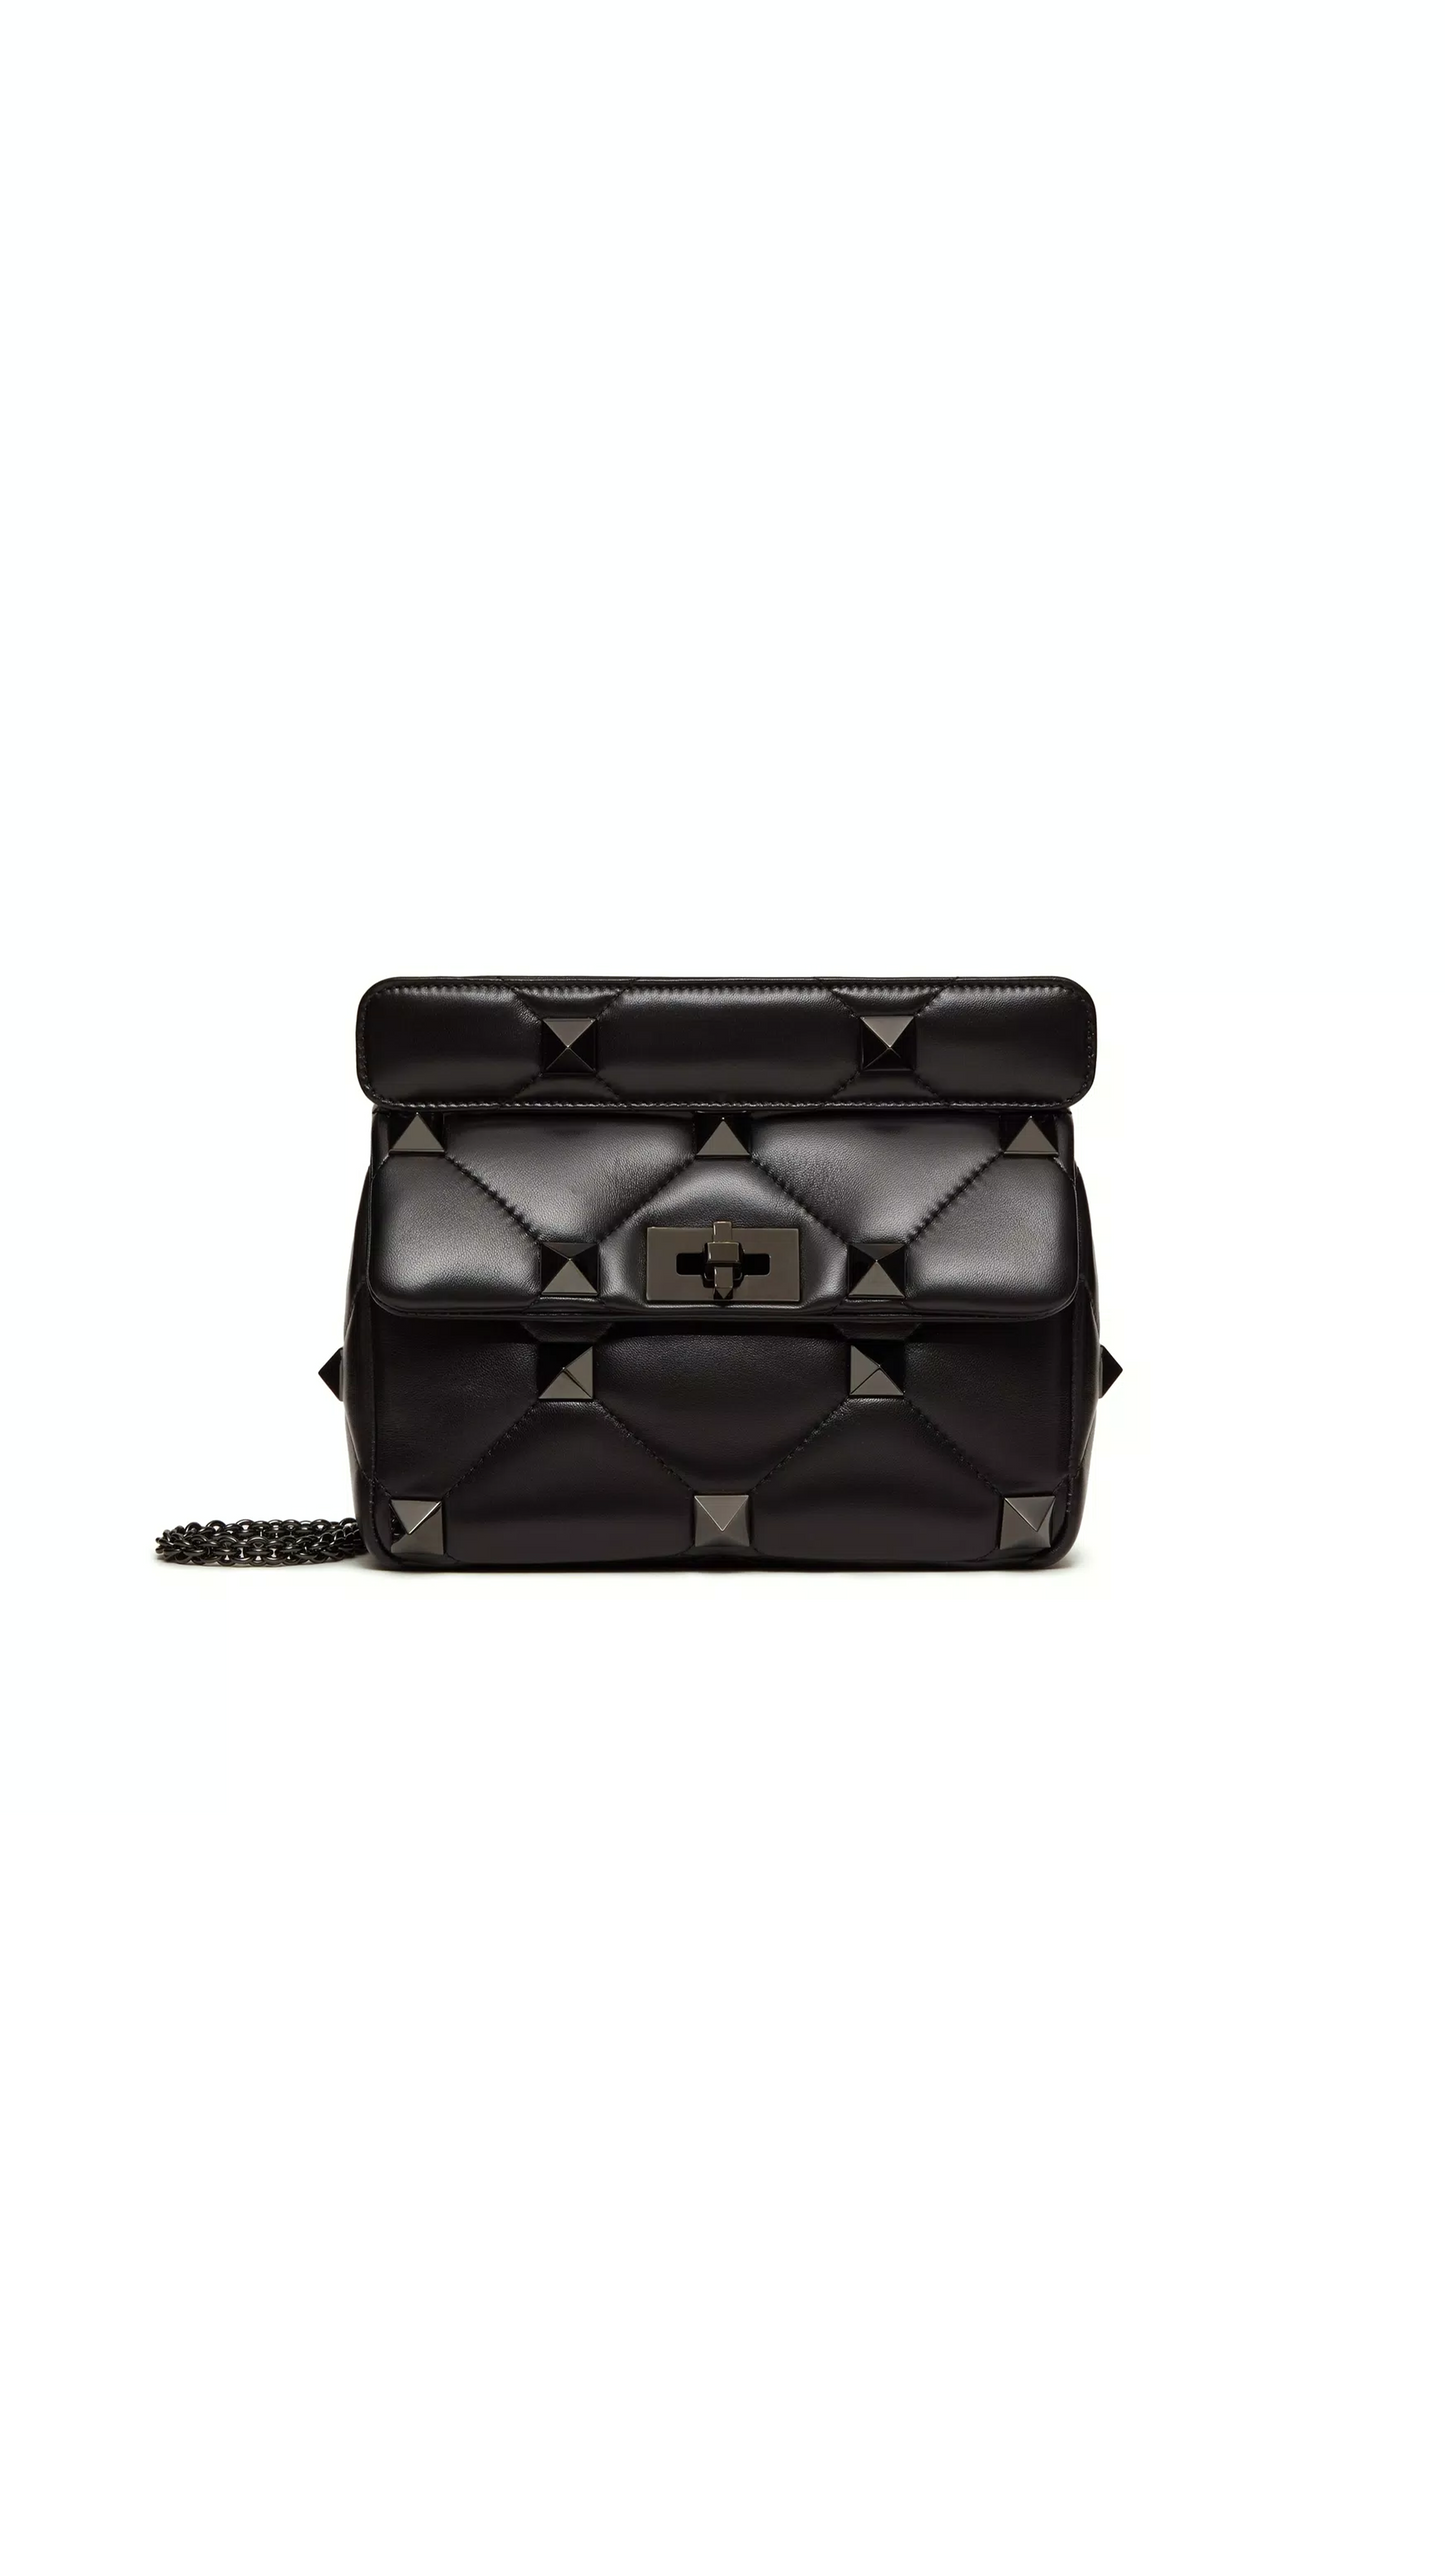 Medium Roman Stud the Shoulder Bag in Nappa With Chain and Tone-on-tone Studs - Black